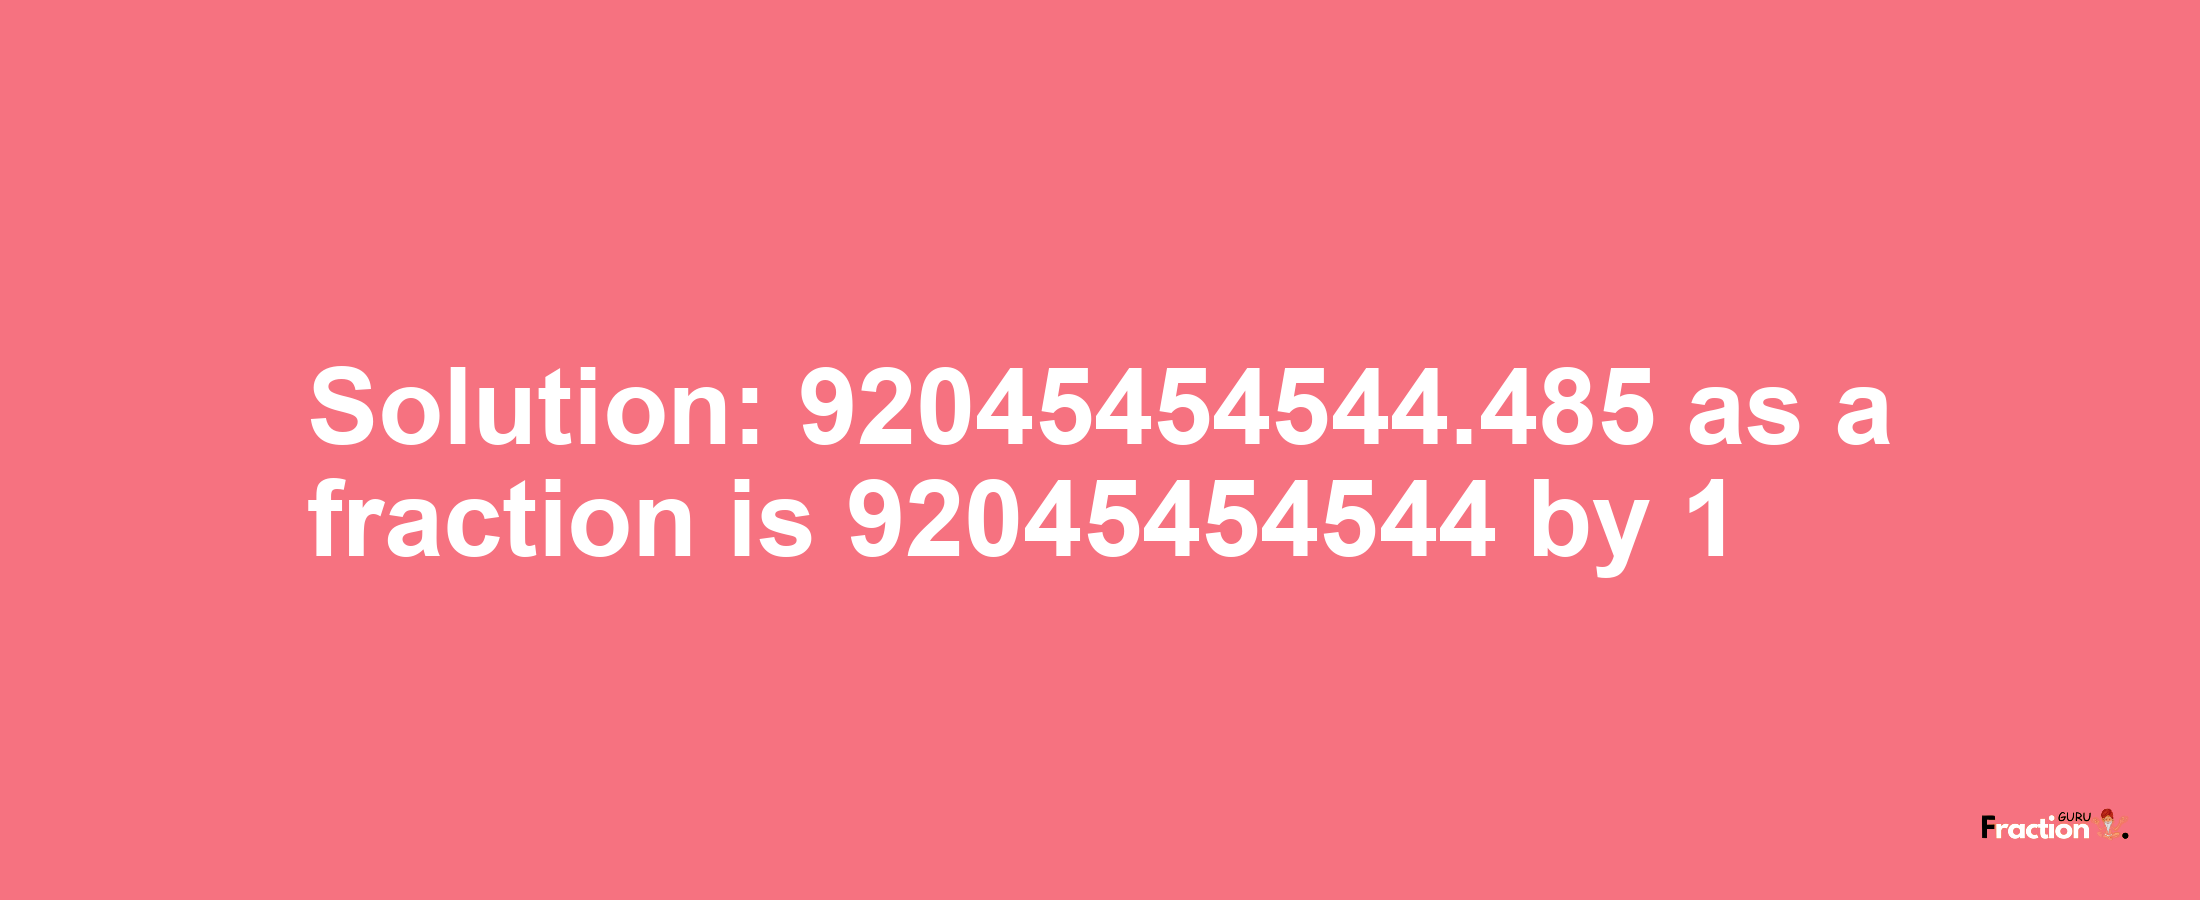 Solution:92045454544.485 as a fraction is 92045454544/1